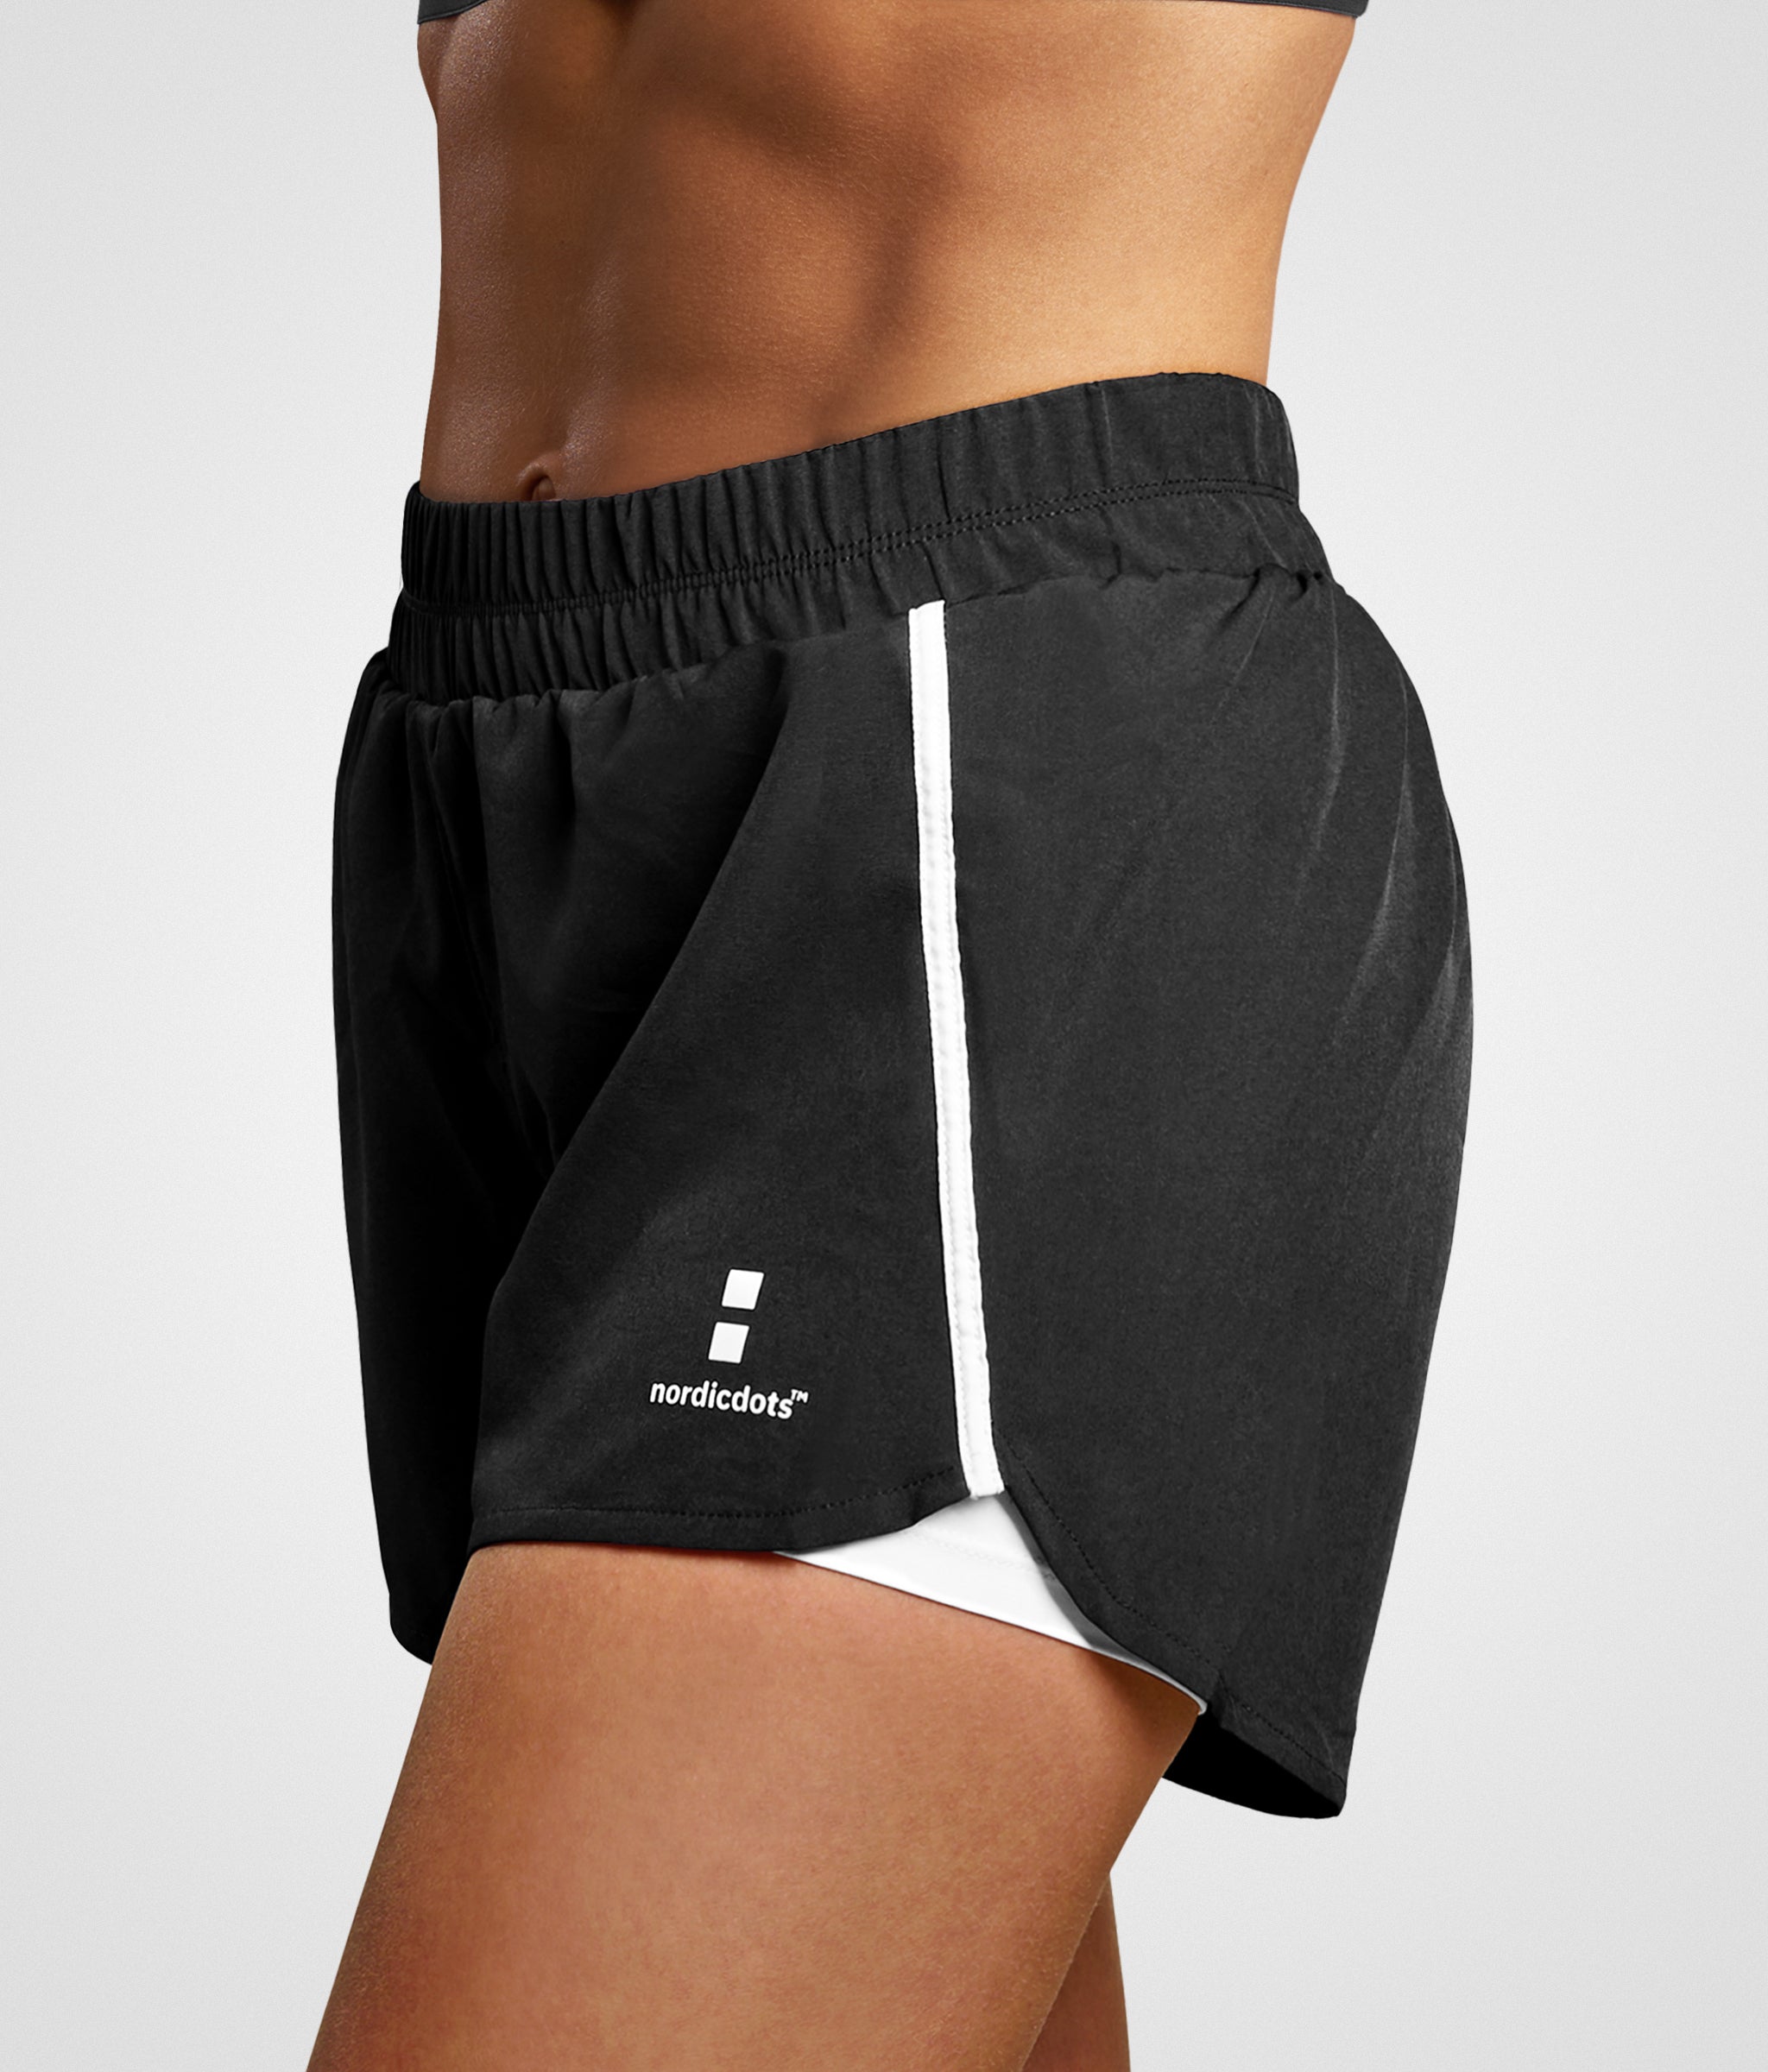 nordicdots Lightweight training shorts, with integrated underpants and breathable materials